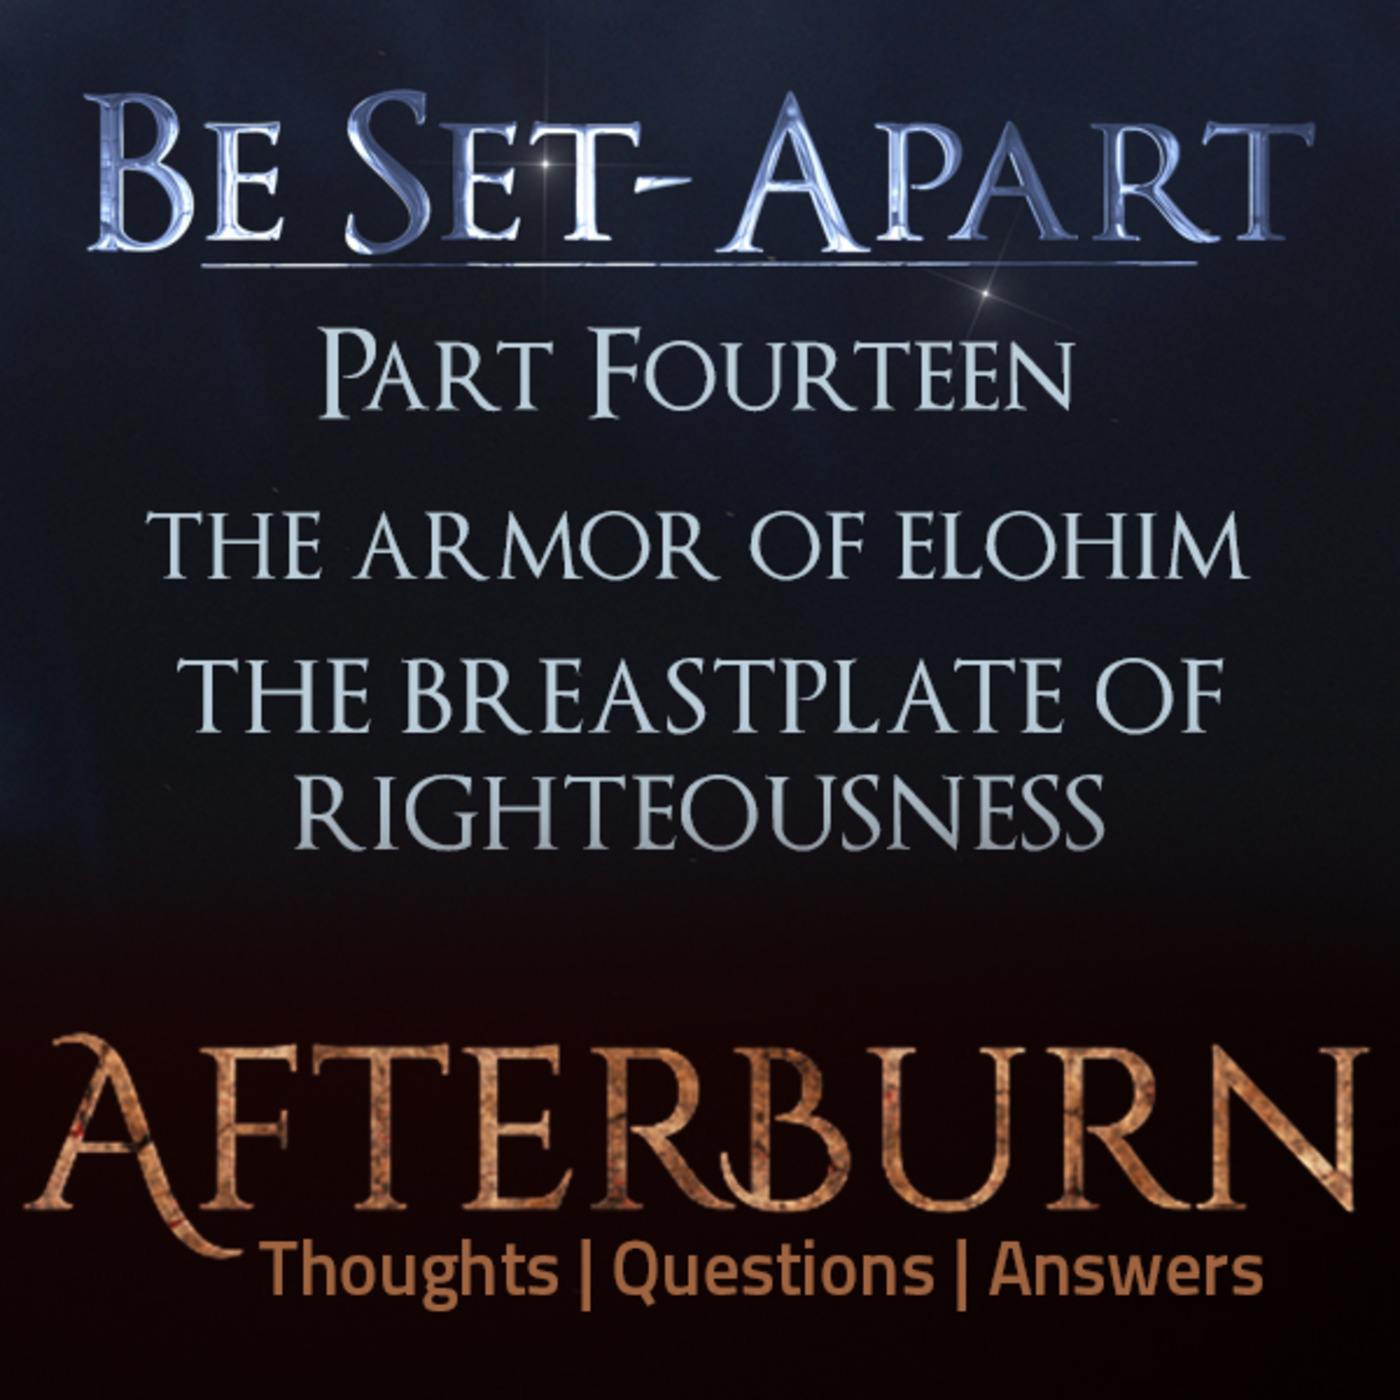 Episode 790: Afterburn | Thoughts, Q&A on Be Set-Apart | Part Fourteen | The Breastplate of Righteousness